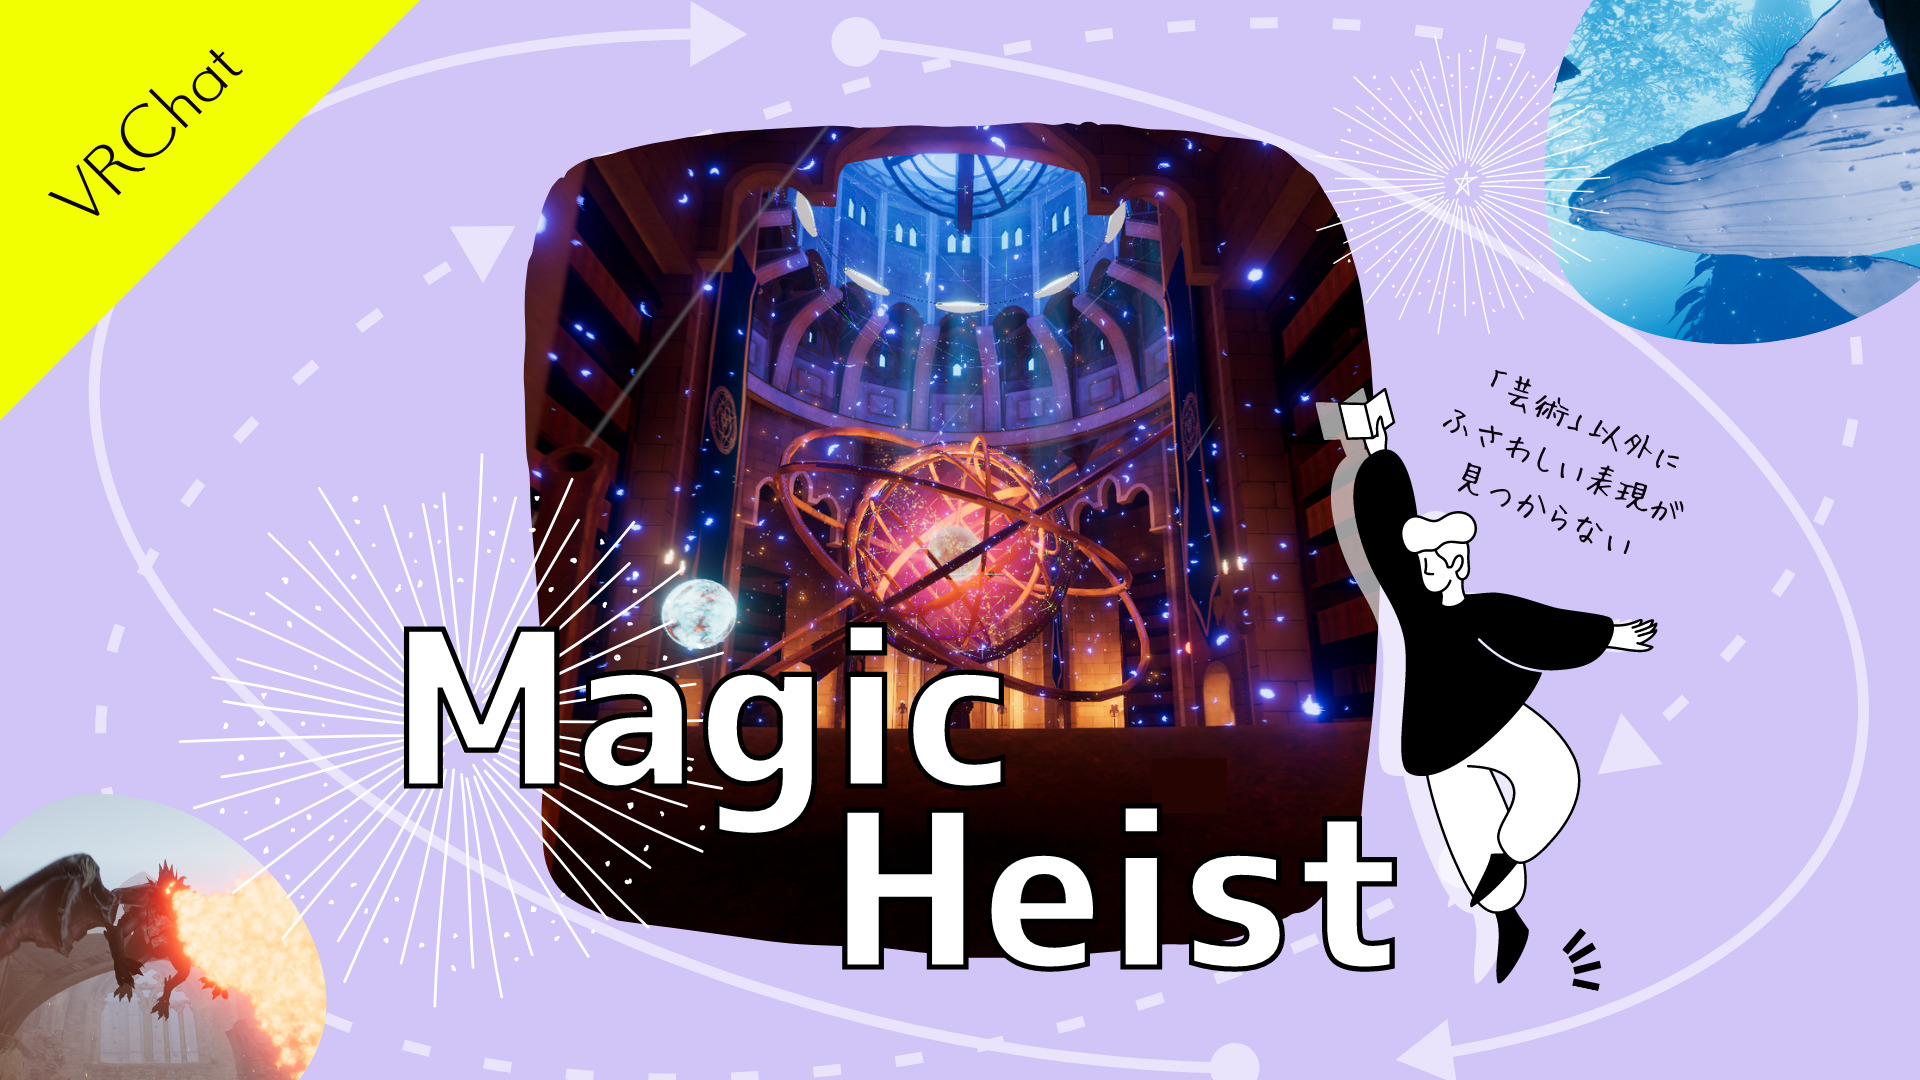 About Magic Heist